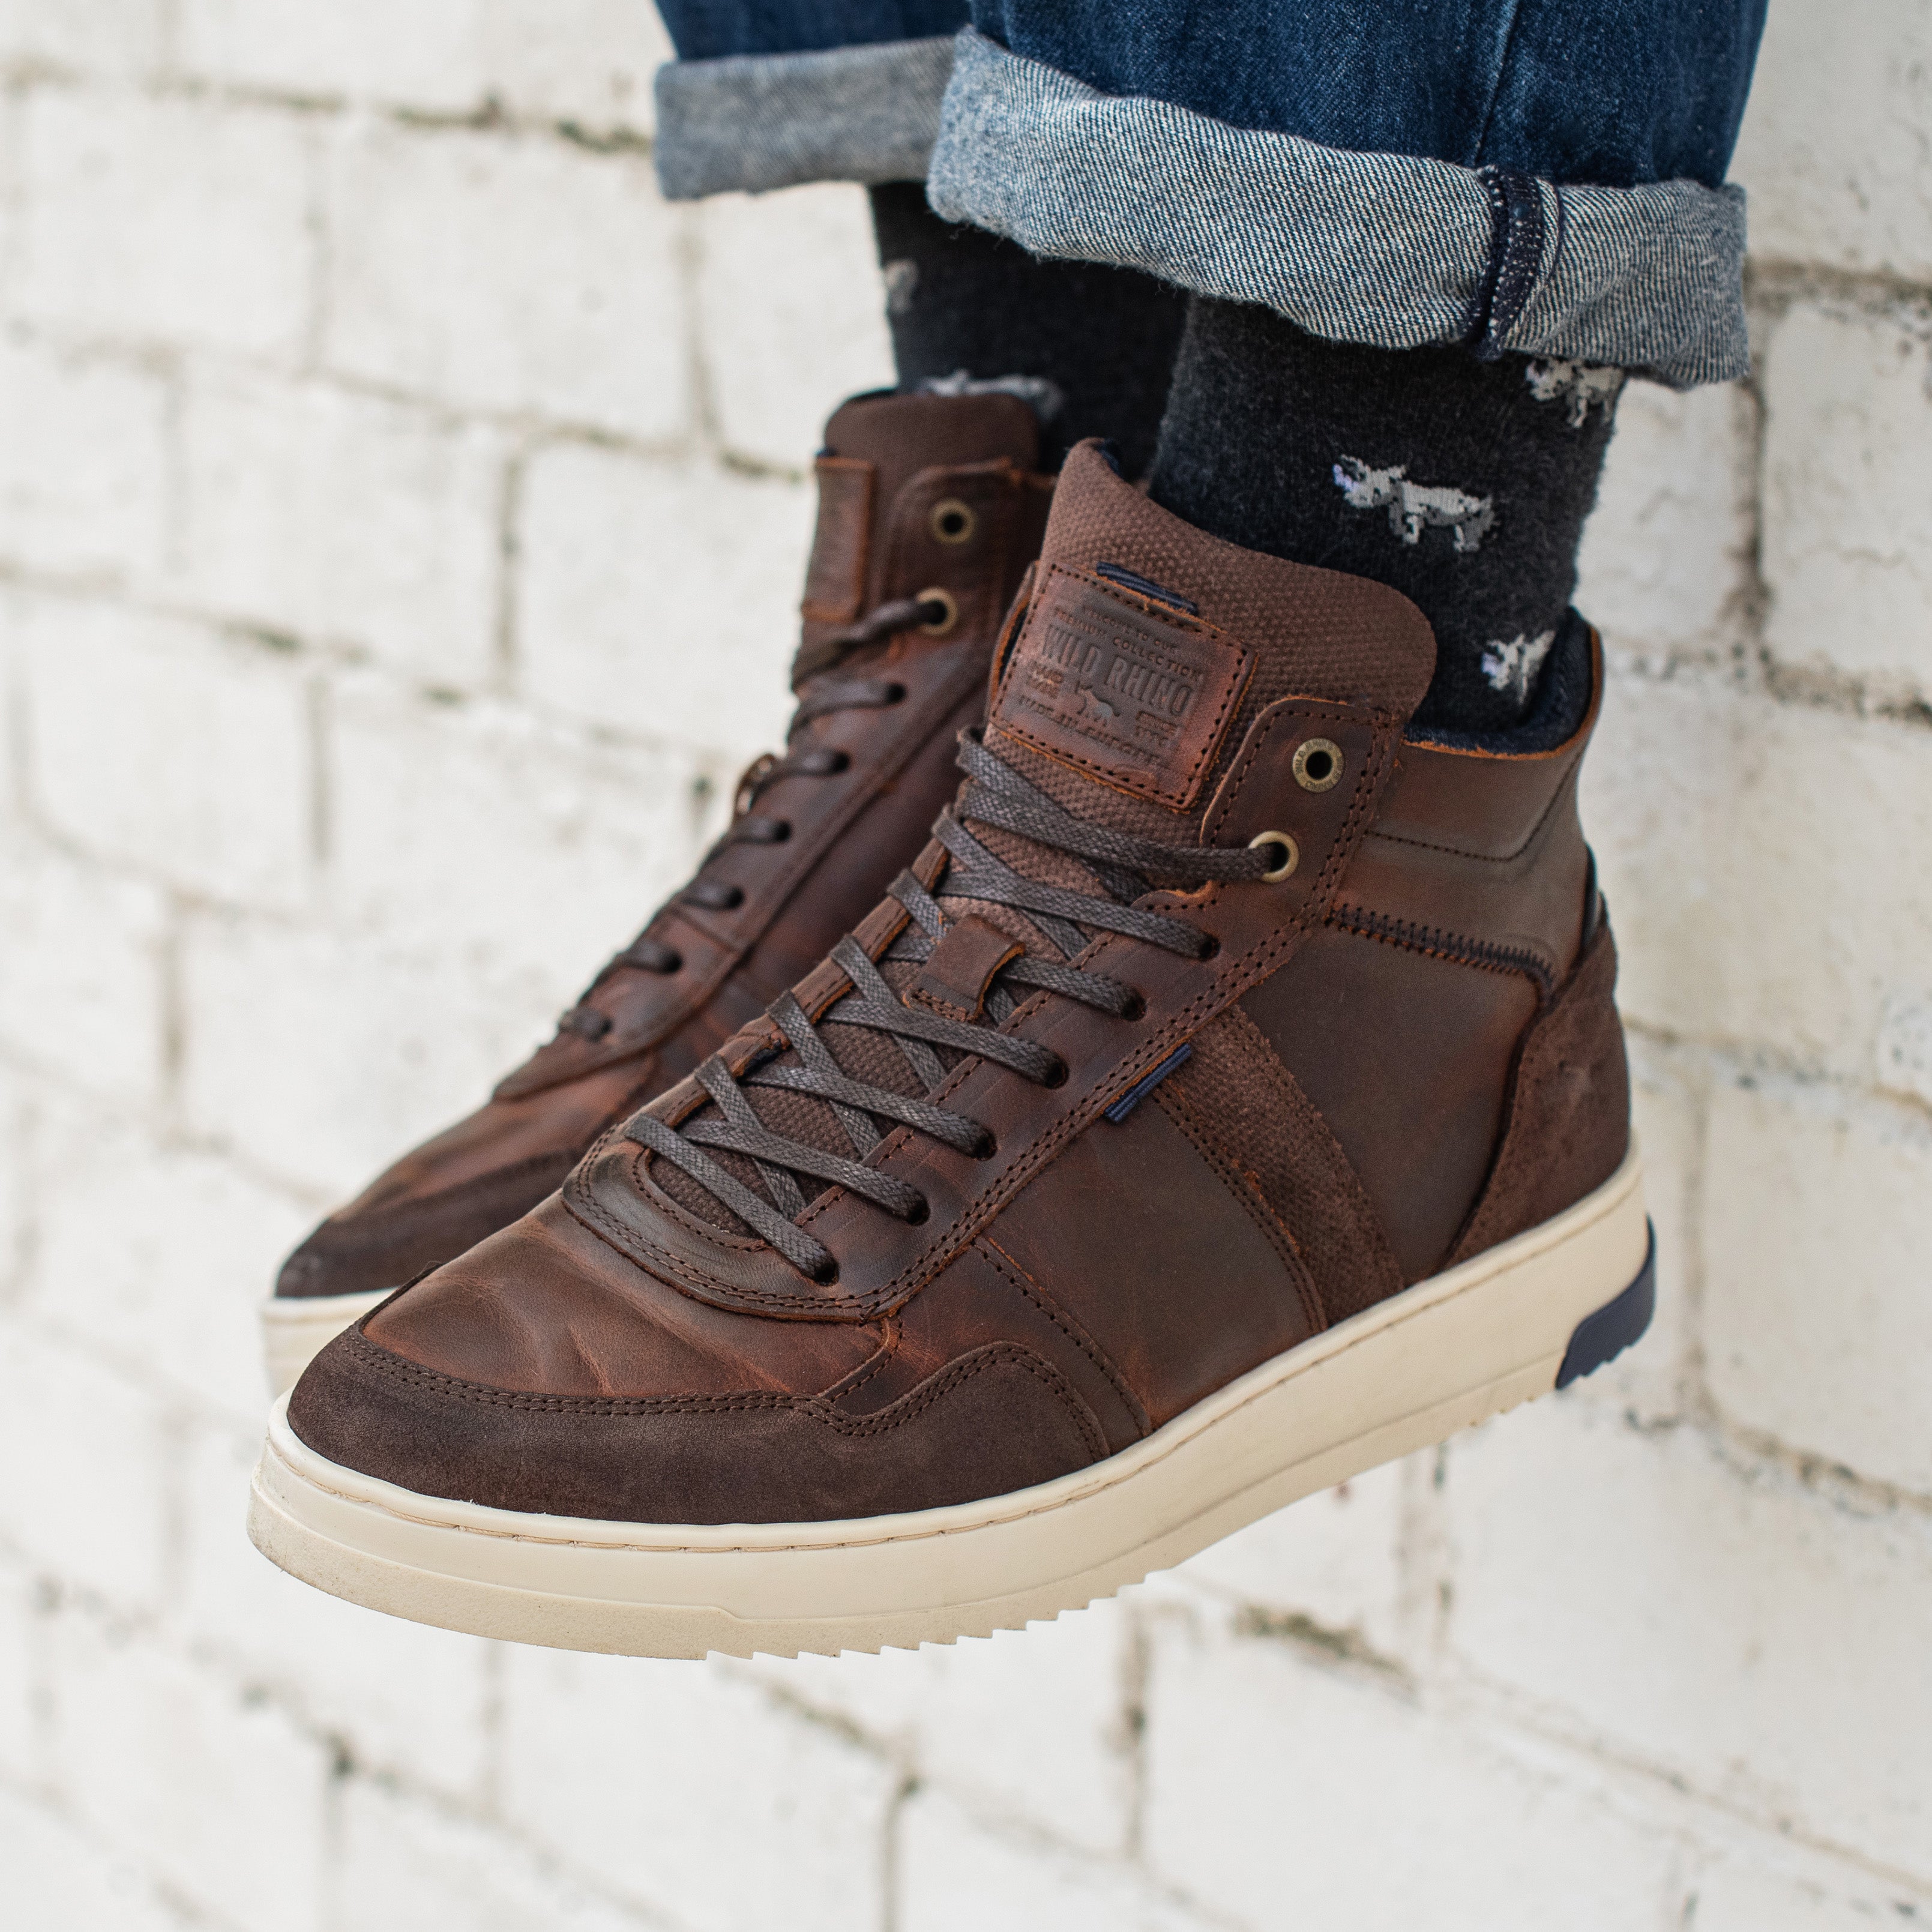 Shop Men's New Arrivals - Shoes and Boots Online Now - At Wild Rhino